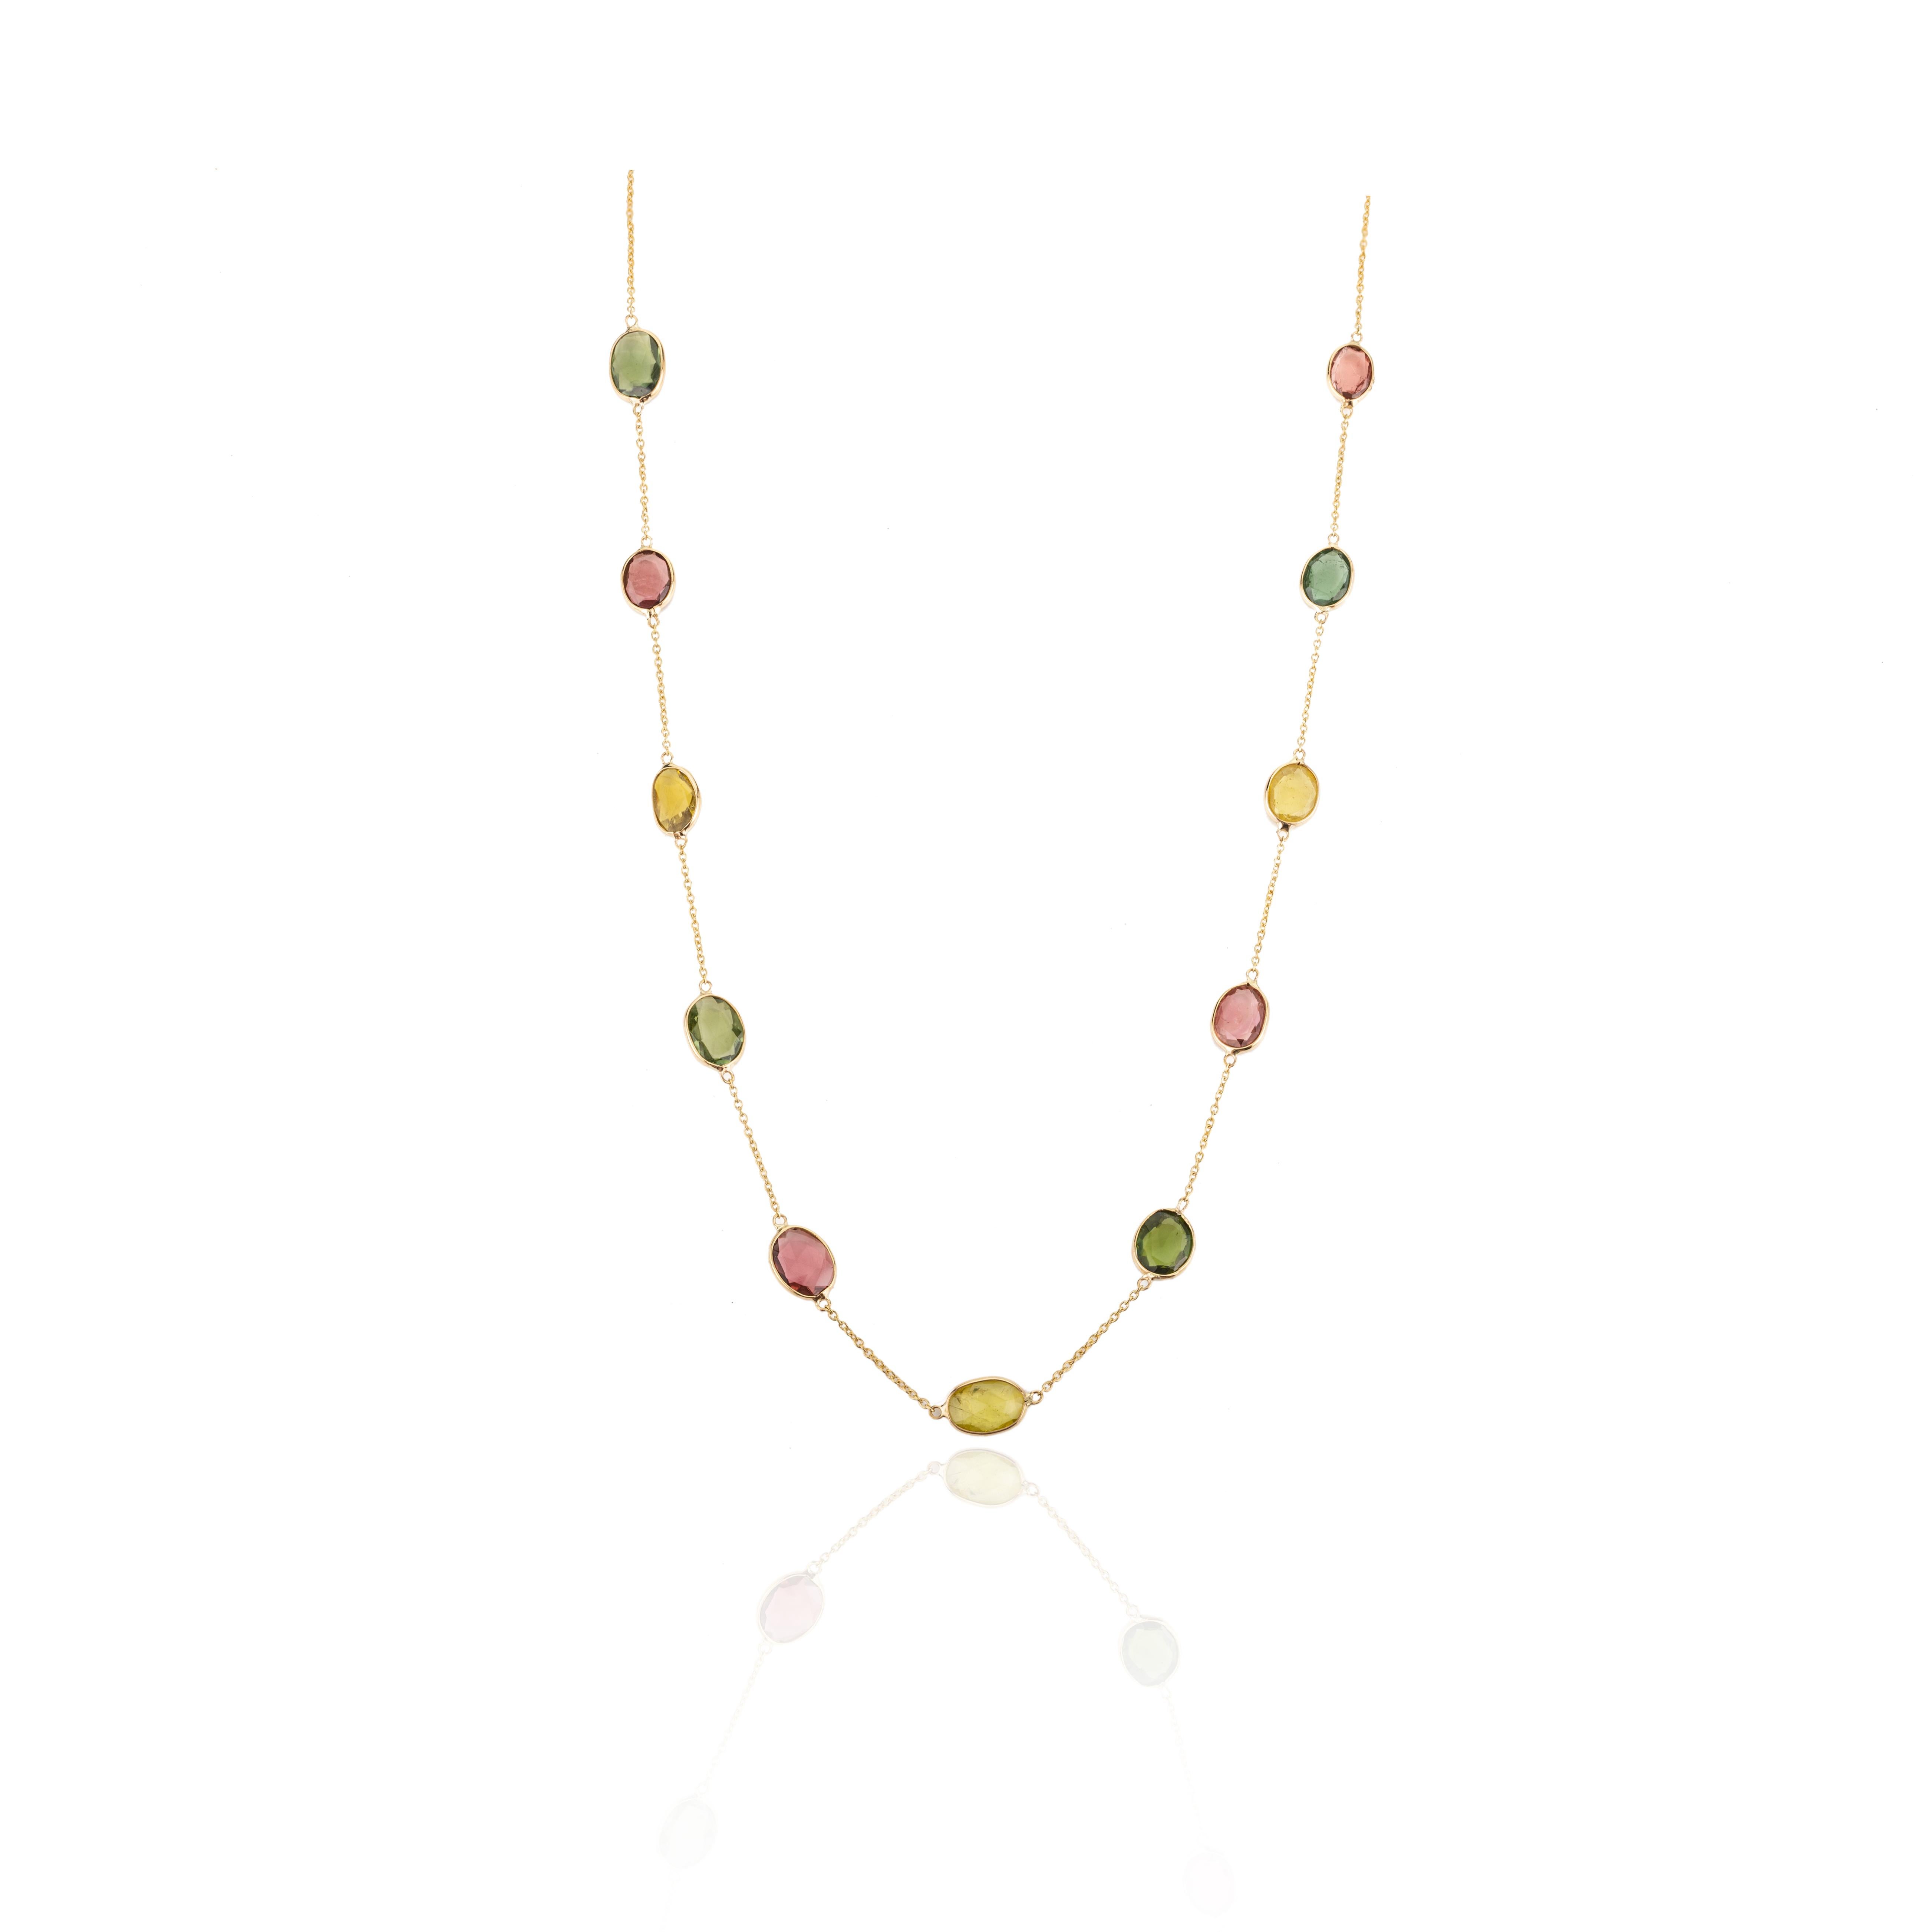 Women's 8.25 Carat Natural Tourmaline Station Chain Necklace in 18k Yellow Gold for Mom For Sale